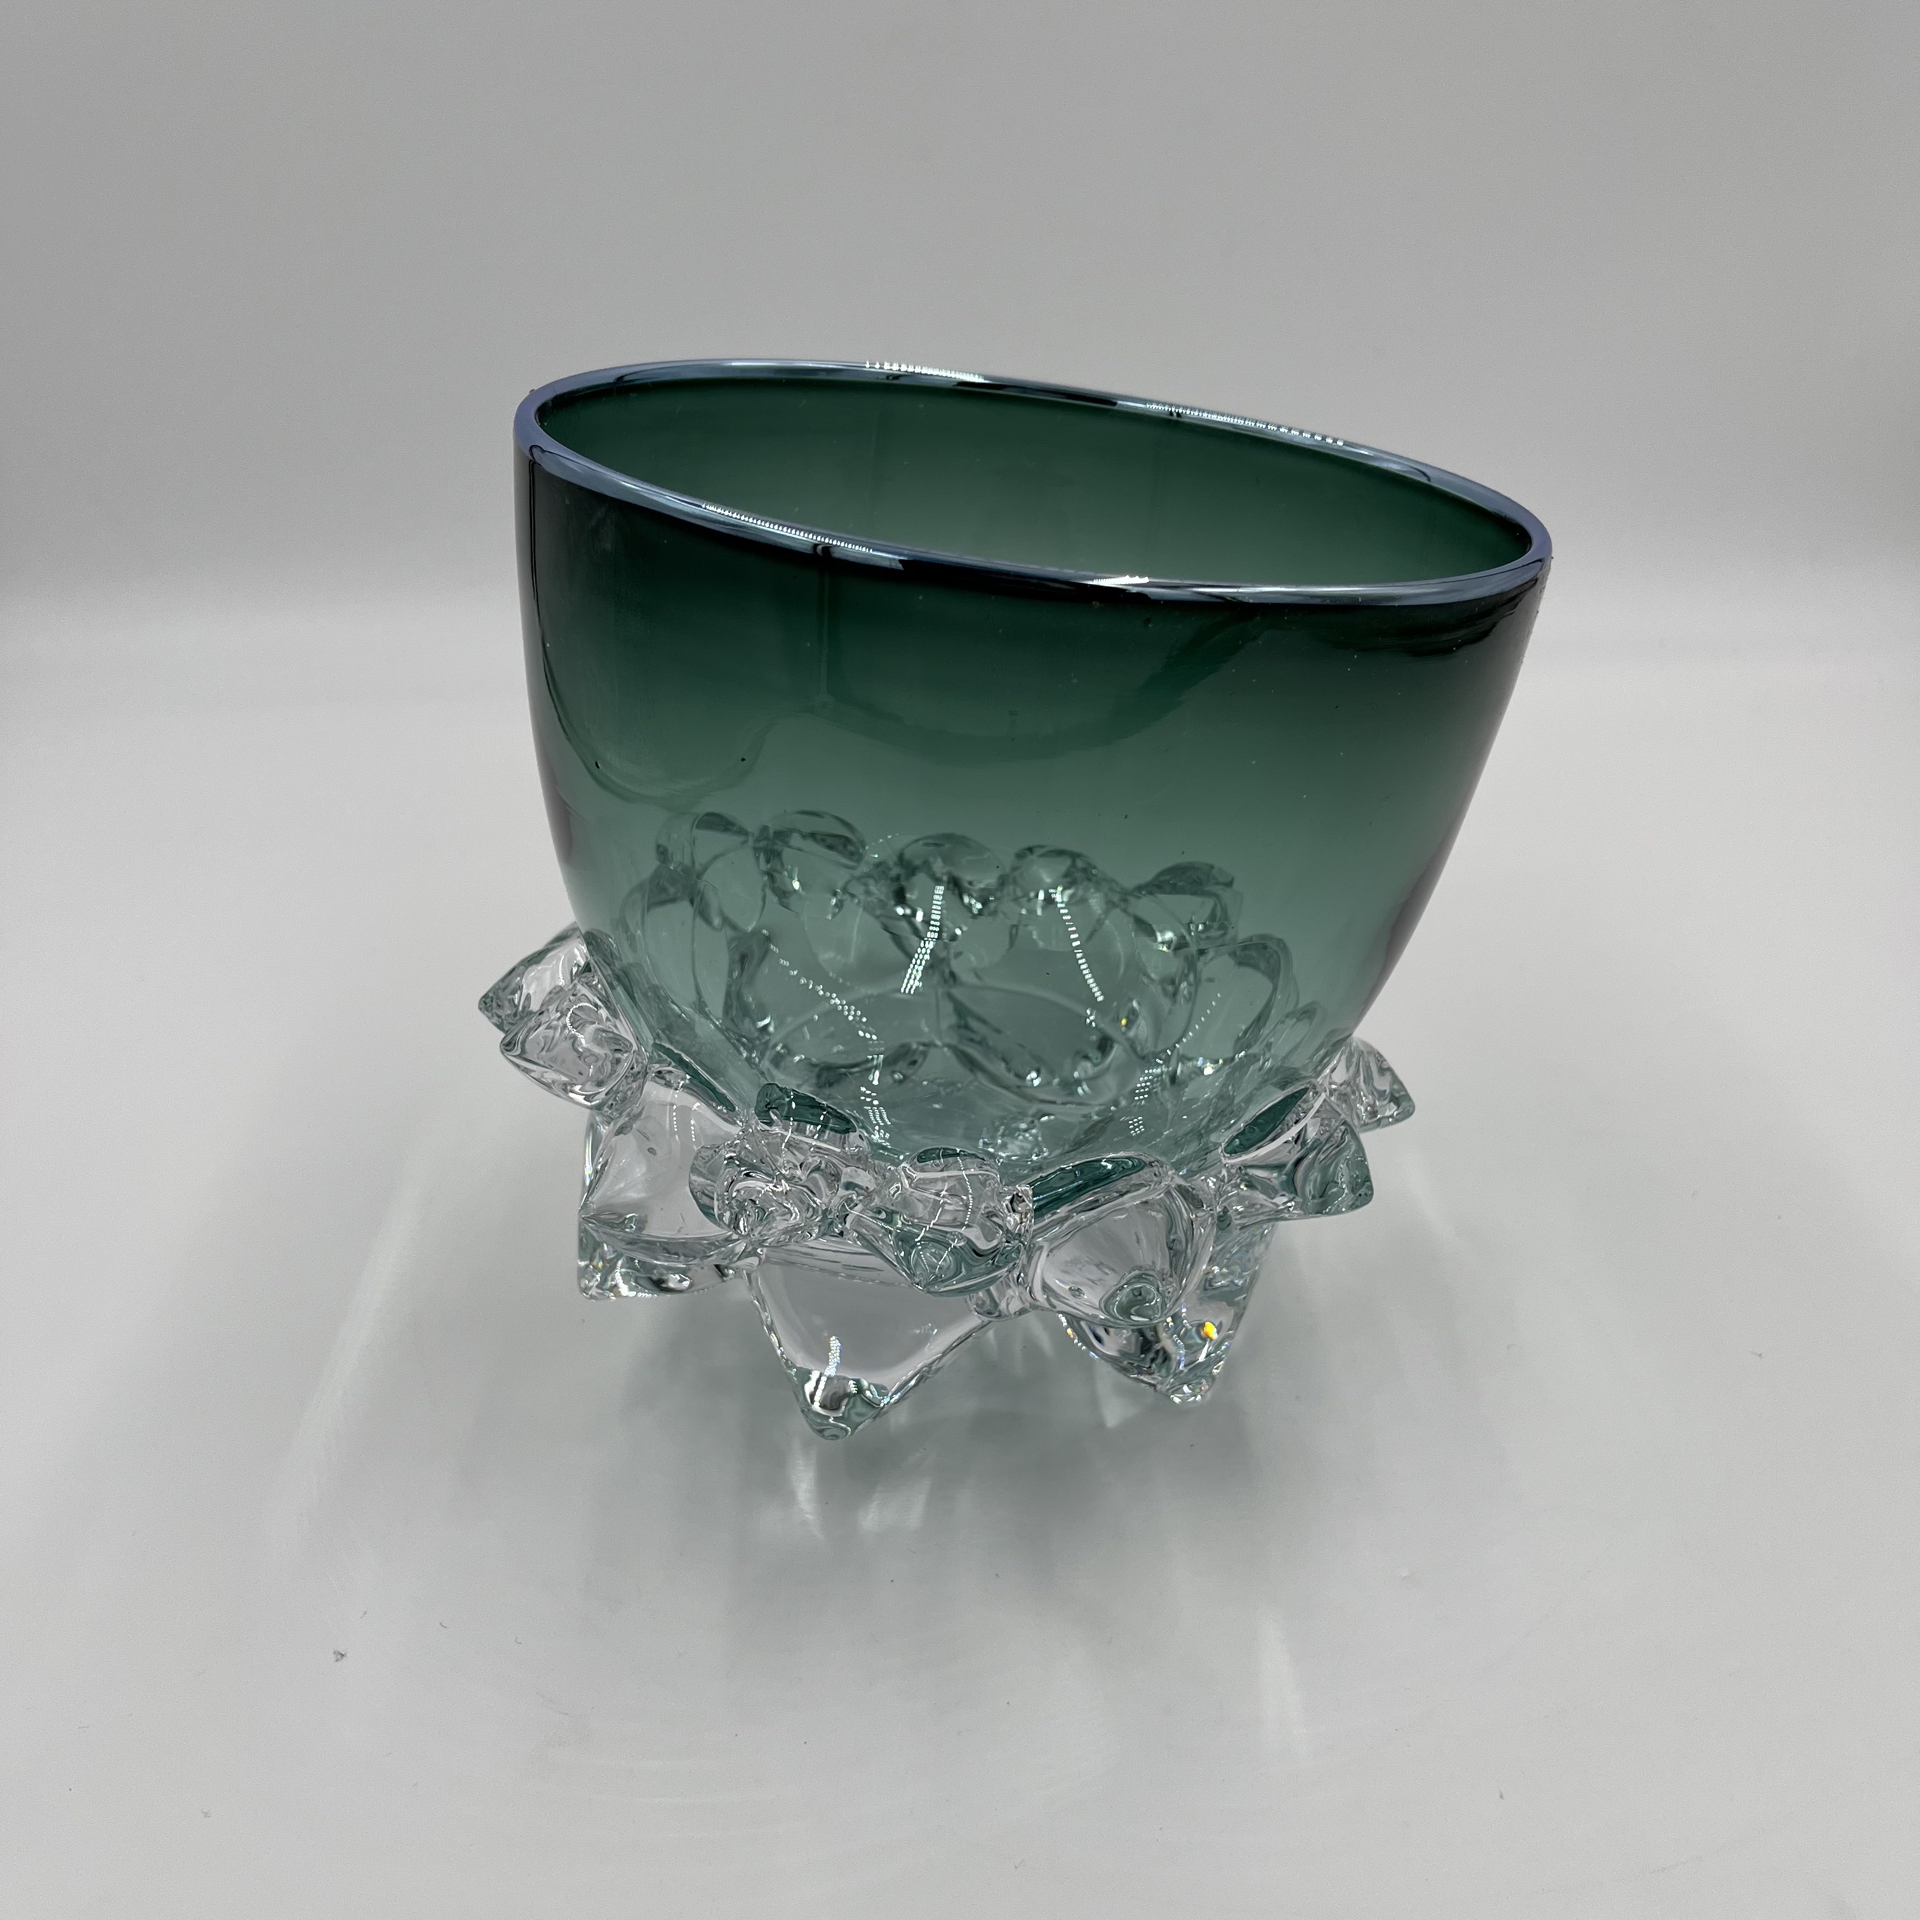 Steel Green Thorn Vessel by Andrew Madvin